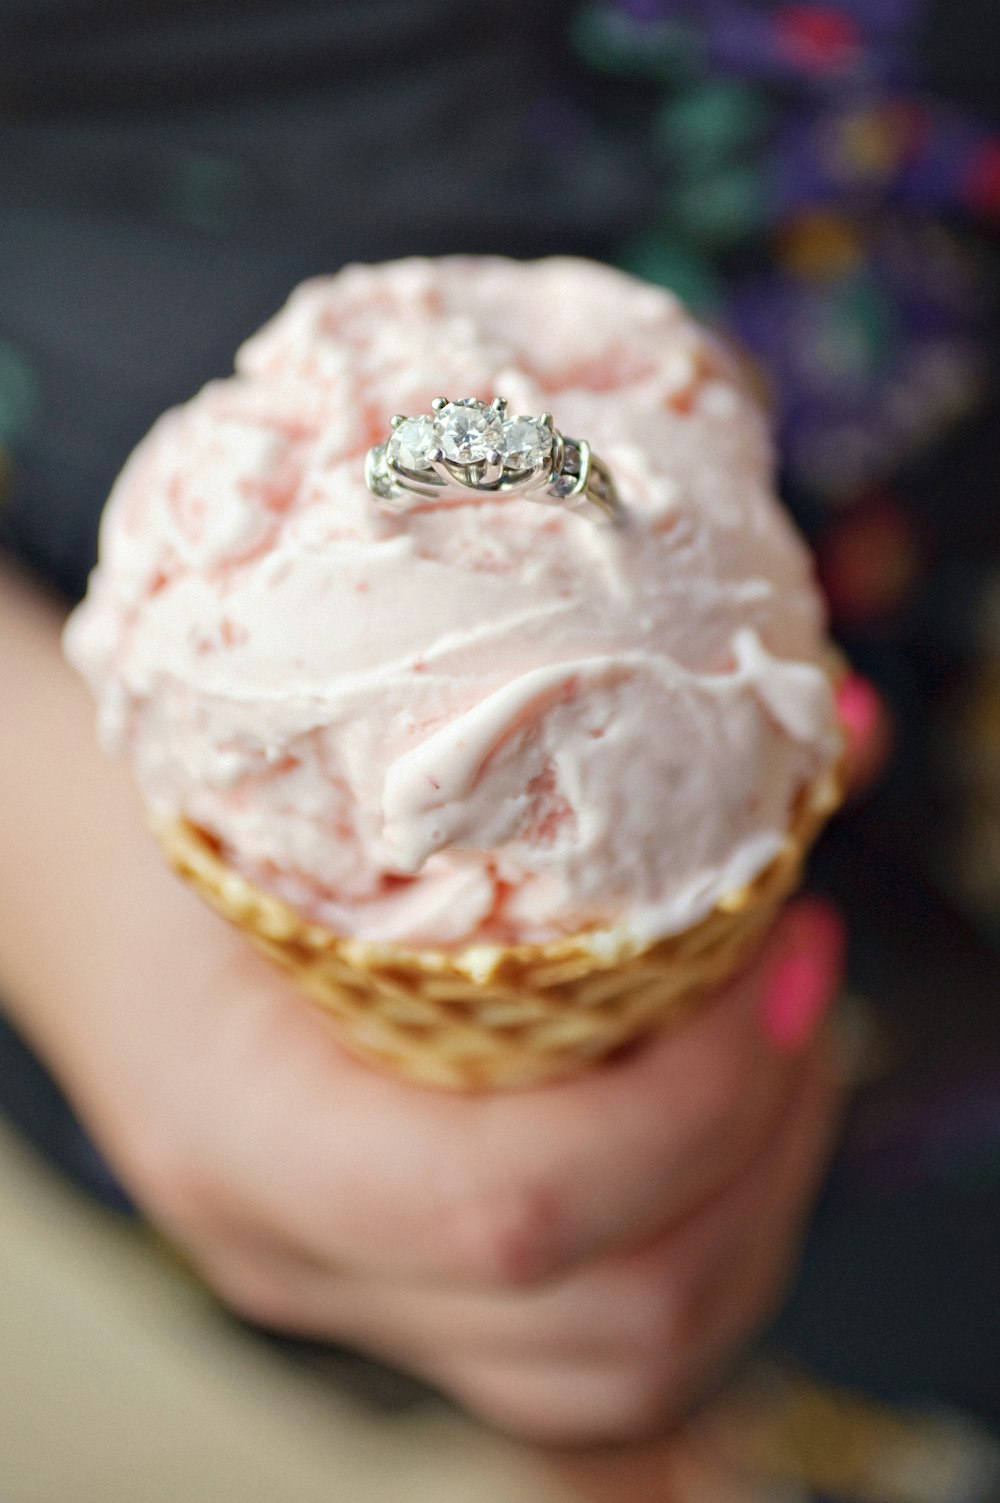 silver-colored ring on ice cream